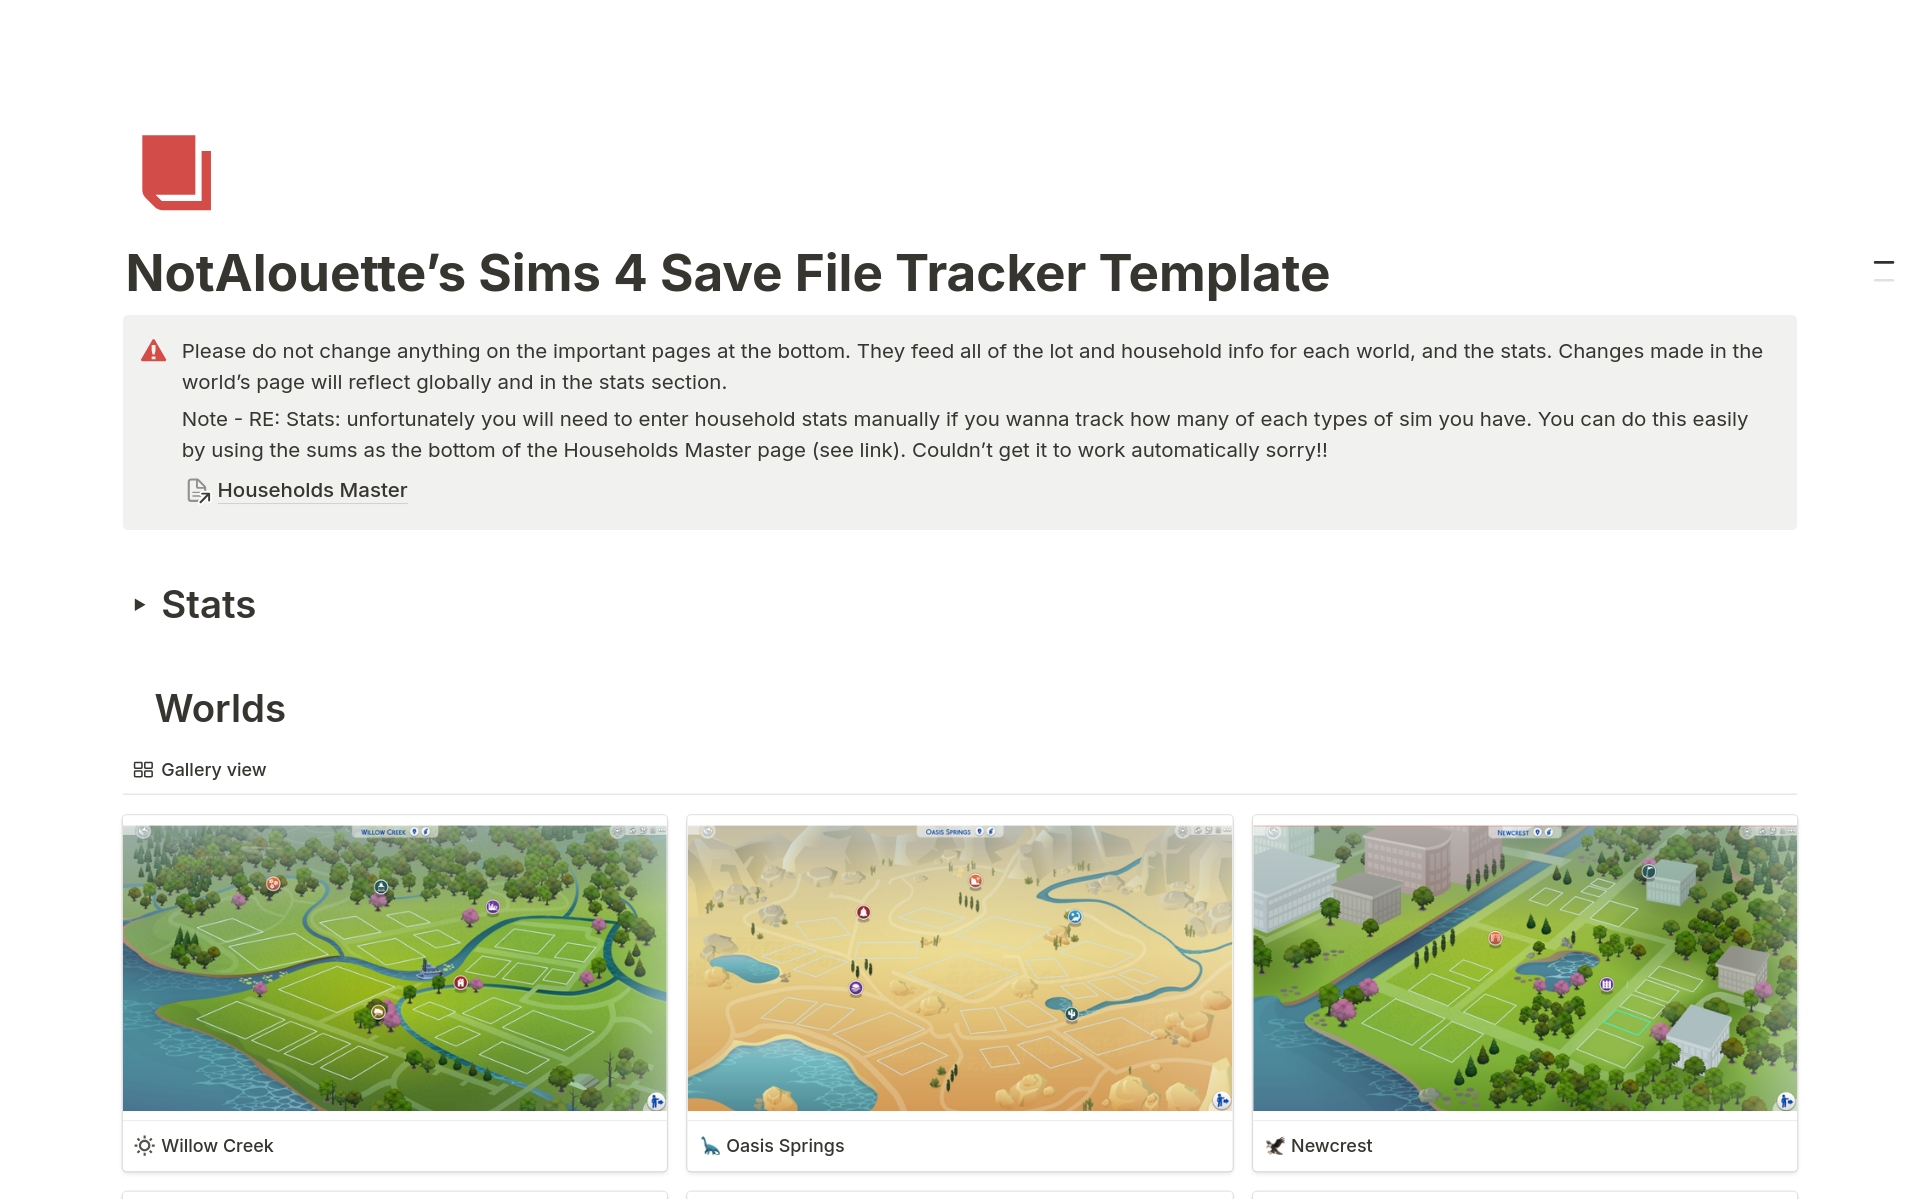 This template contains all of the information about every lot in every world in the sims 4. For those who like to create and manage their own save files, this template is the perfect hub to record everything you need to track for your builds and households.